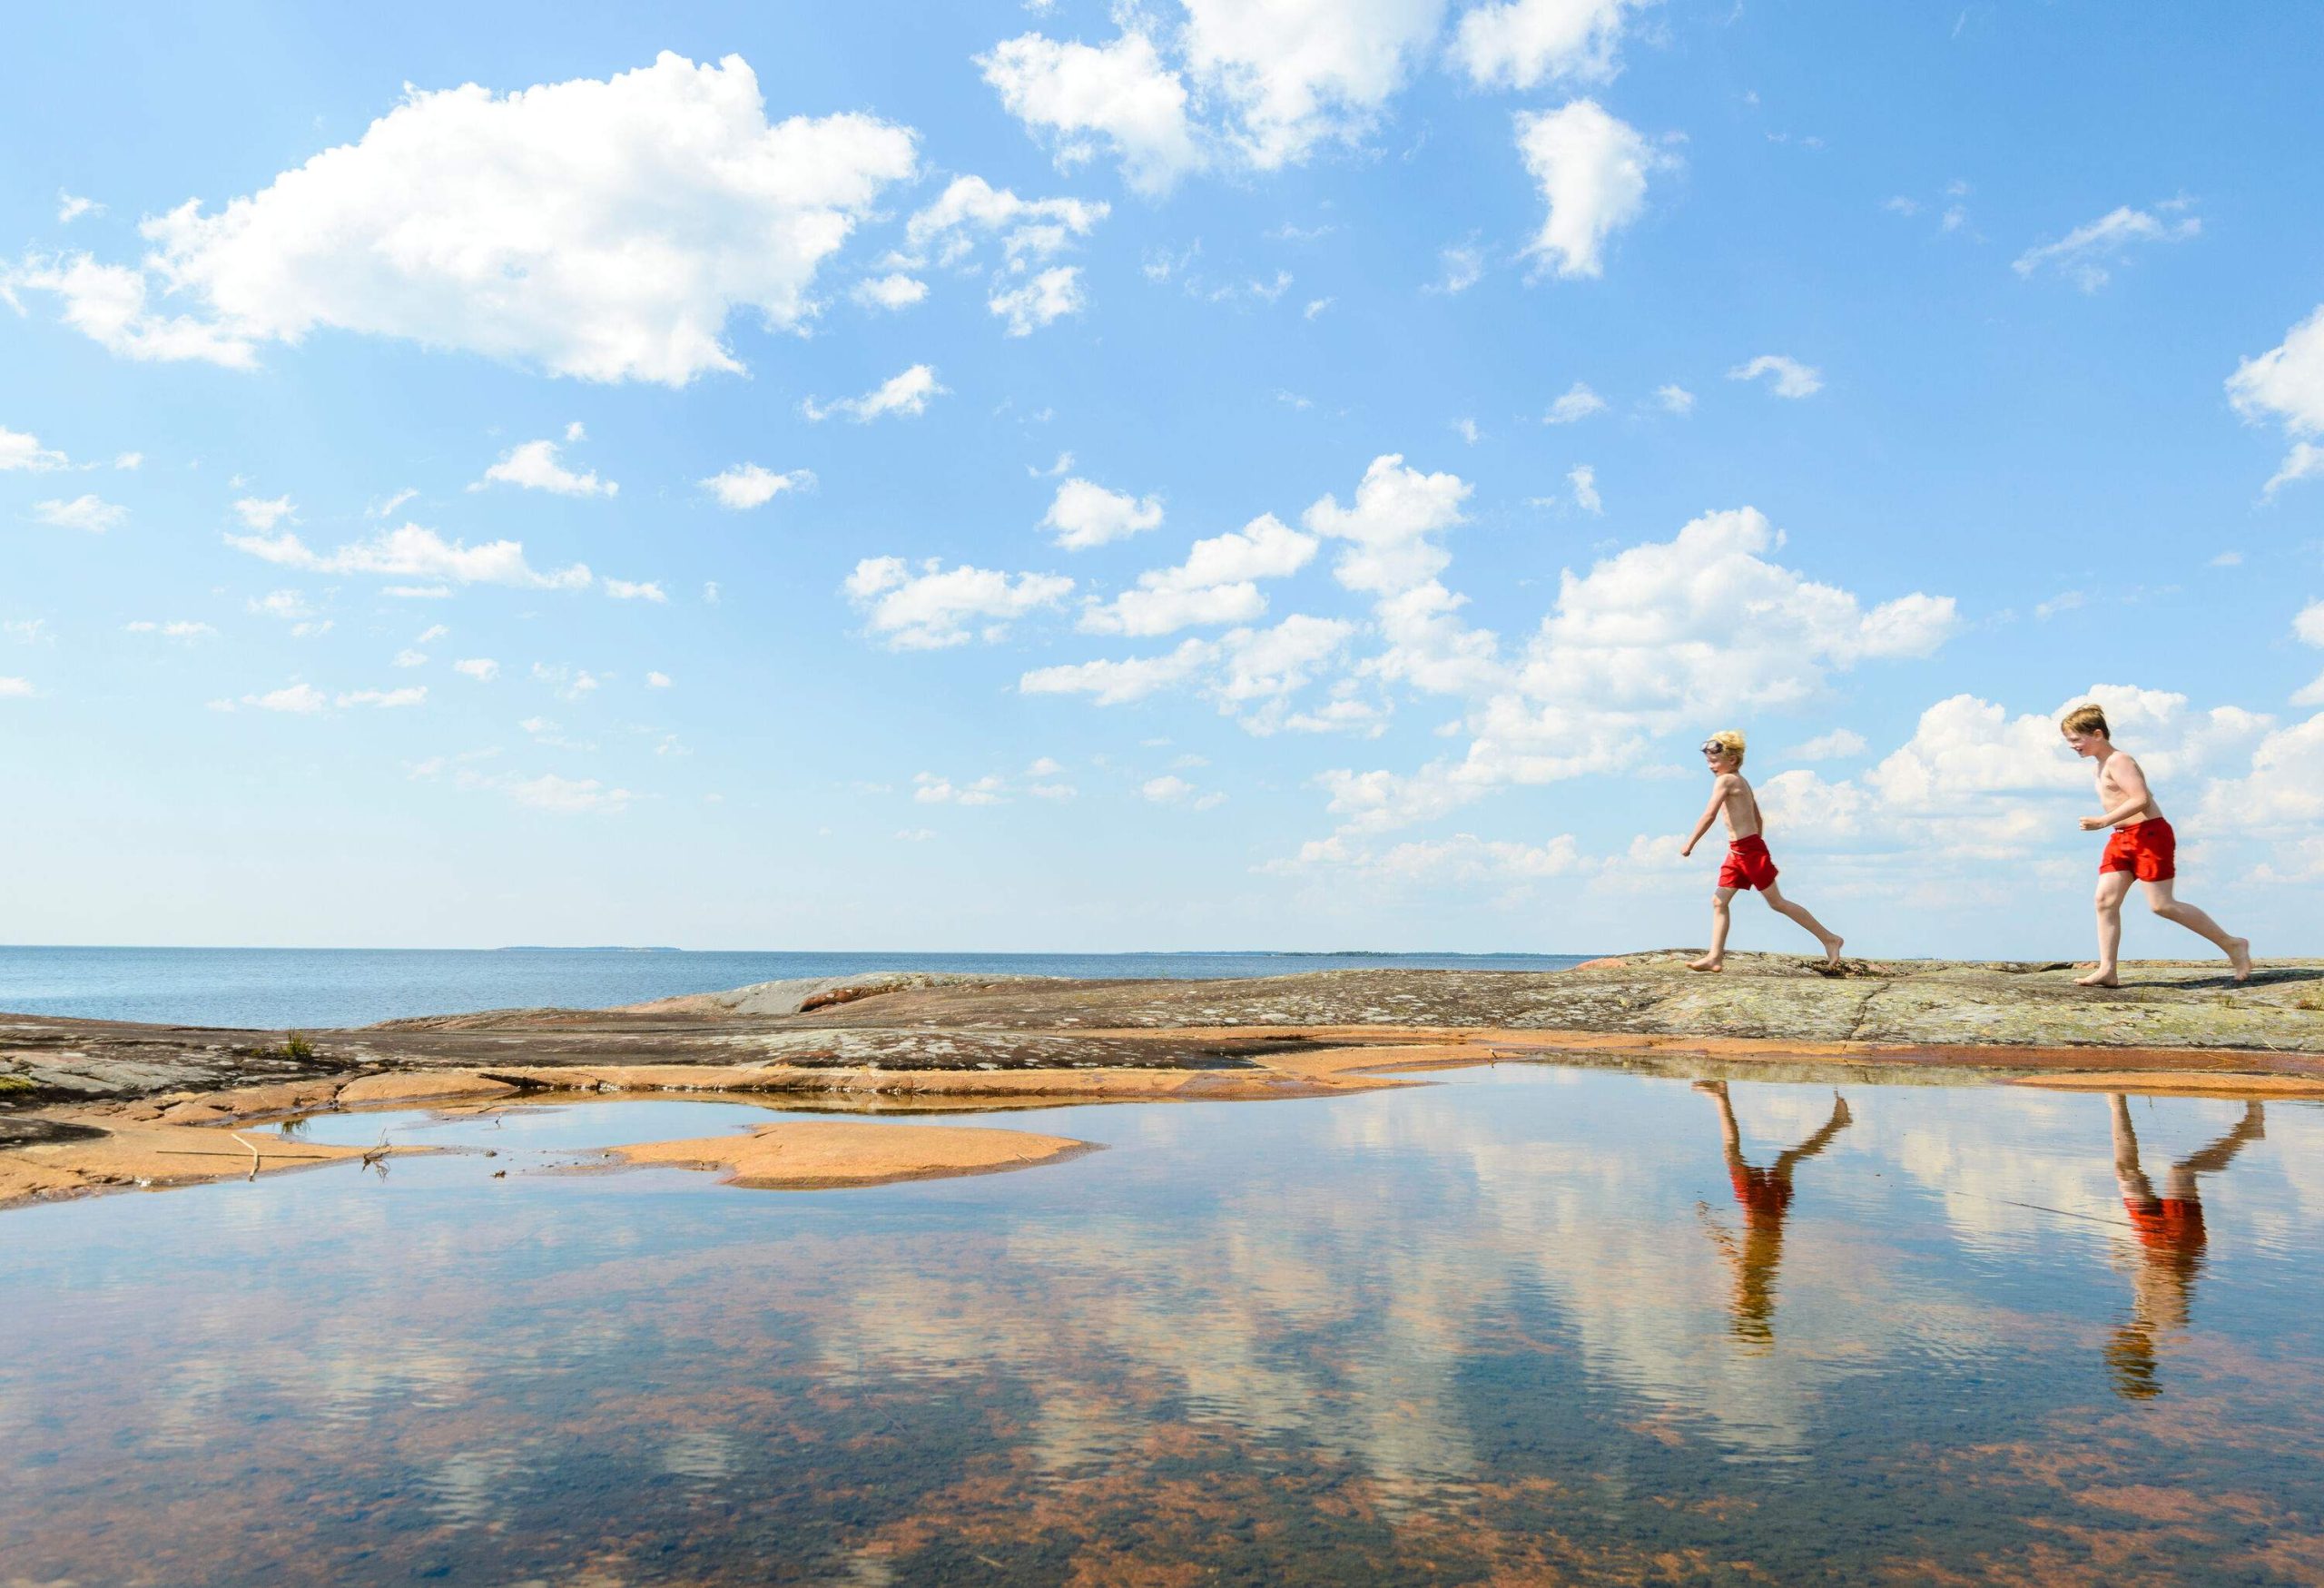 Two kids walk on flat rocks next to a beach's shallow waters.